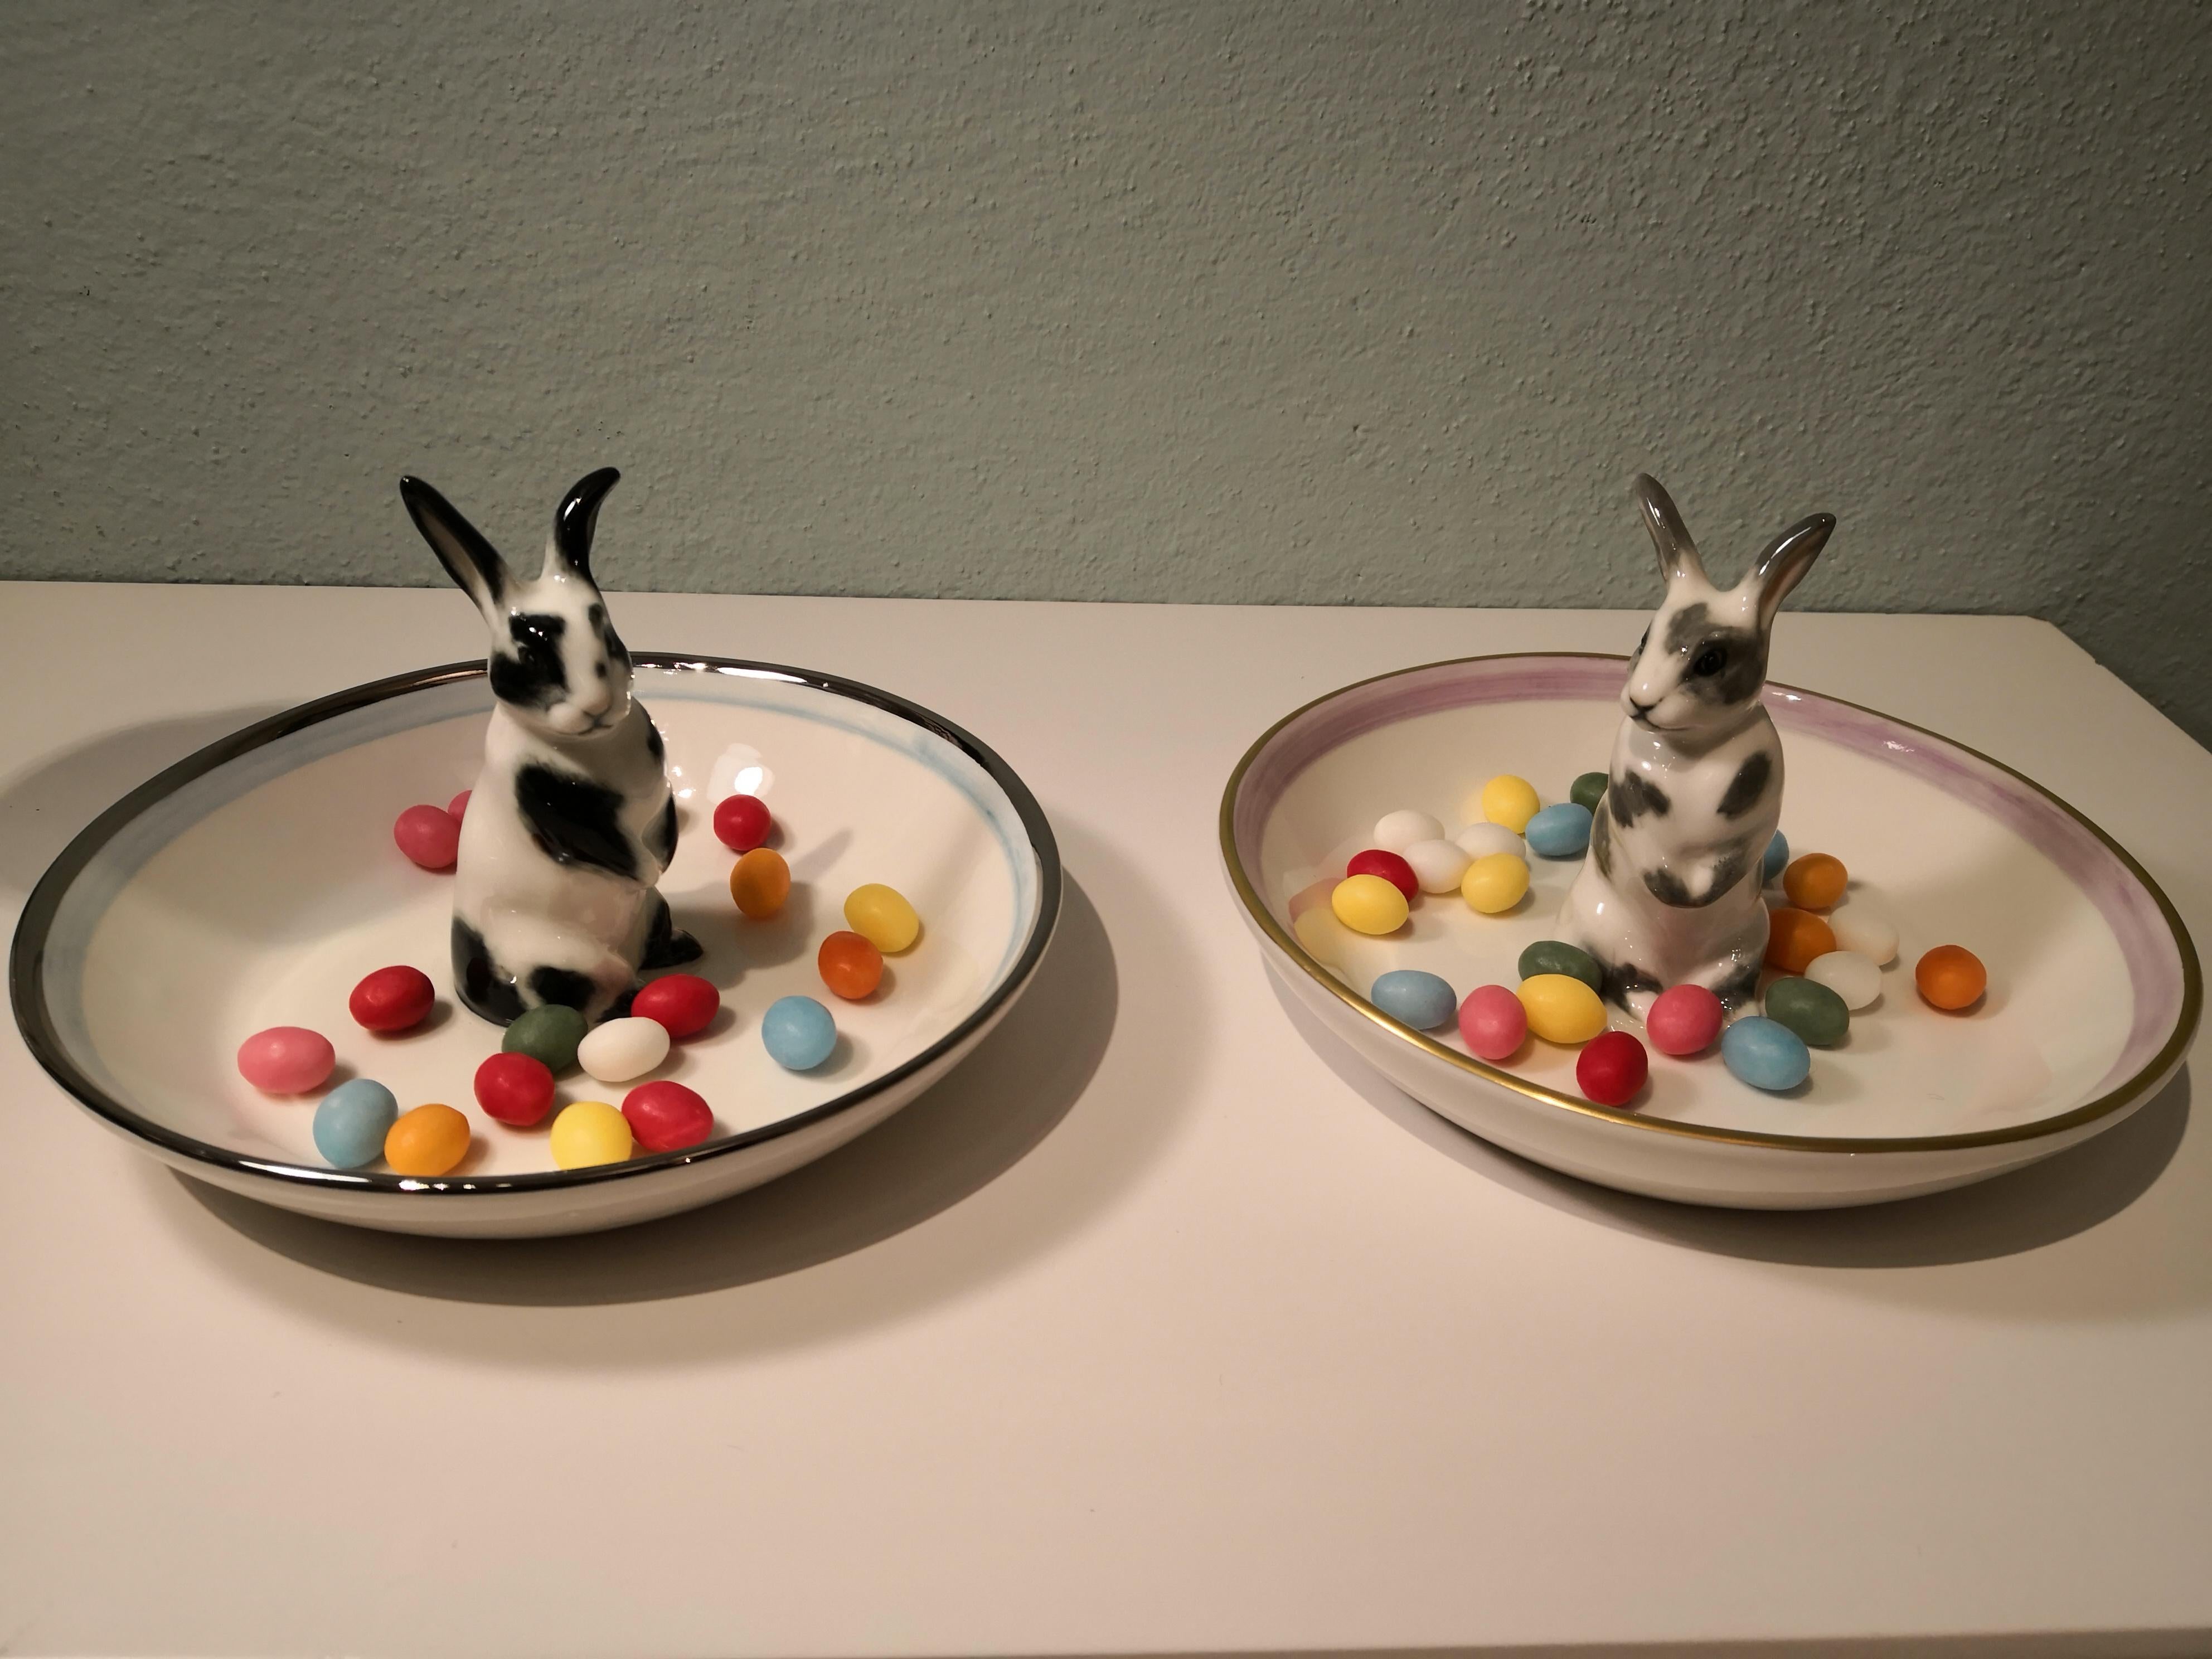 Completely handmade porcelain bowl with a hands-free naturalistic painted Easter rabbit in black and white colors. The rabbit is sitting in the middle of the bowl for decorating nuts or sweets around the figure. Rimmed with a fine platinum line.